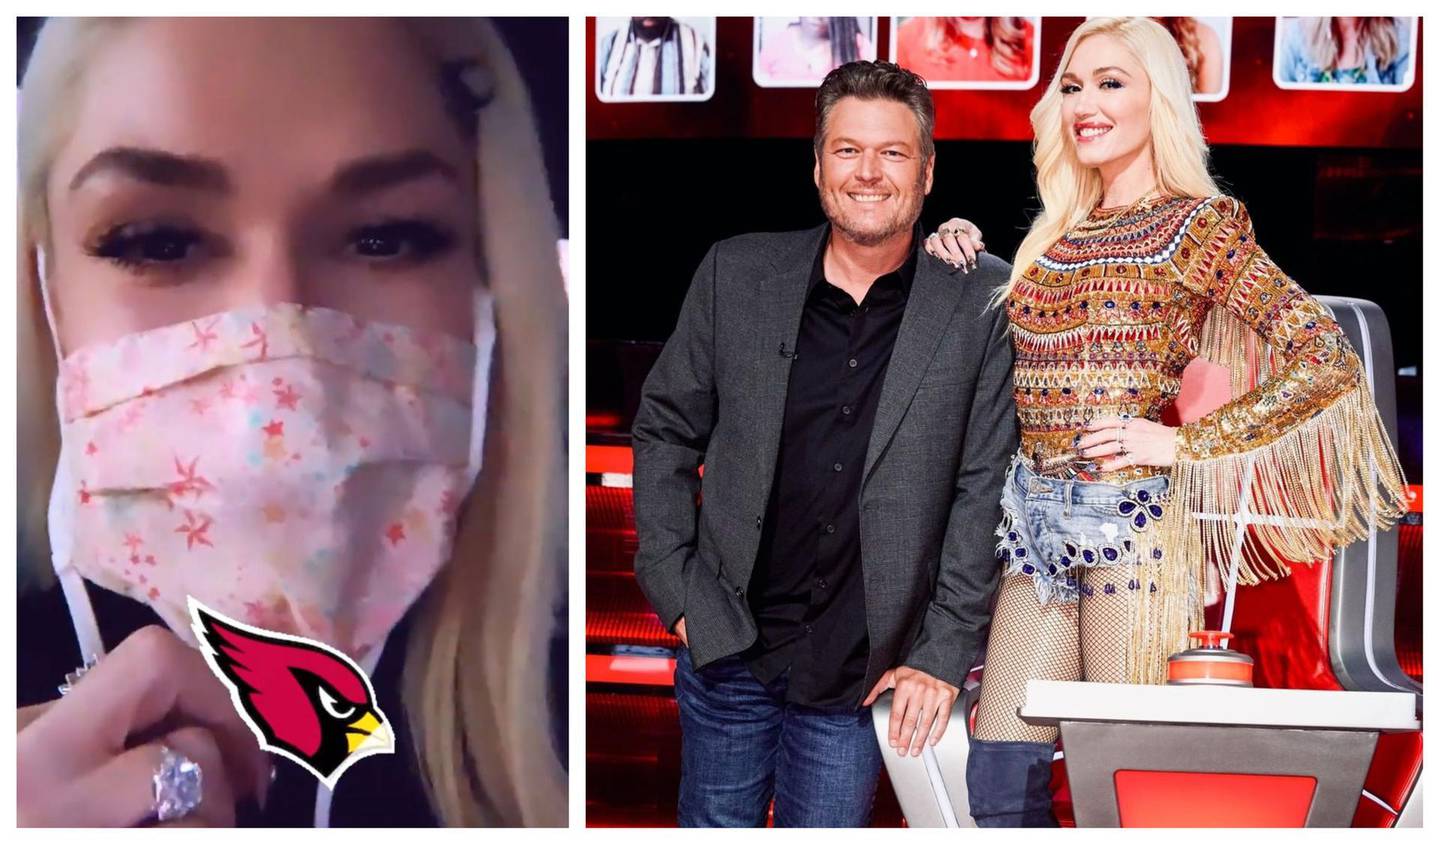 Country star Blake Shelton proposed to his fellow 'The Voice' judge Gwen Stefani in October. Instagram